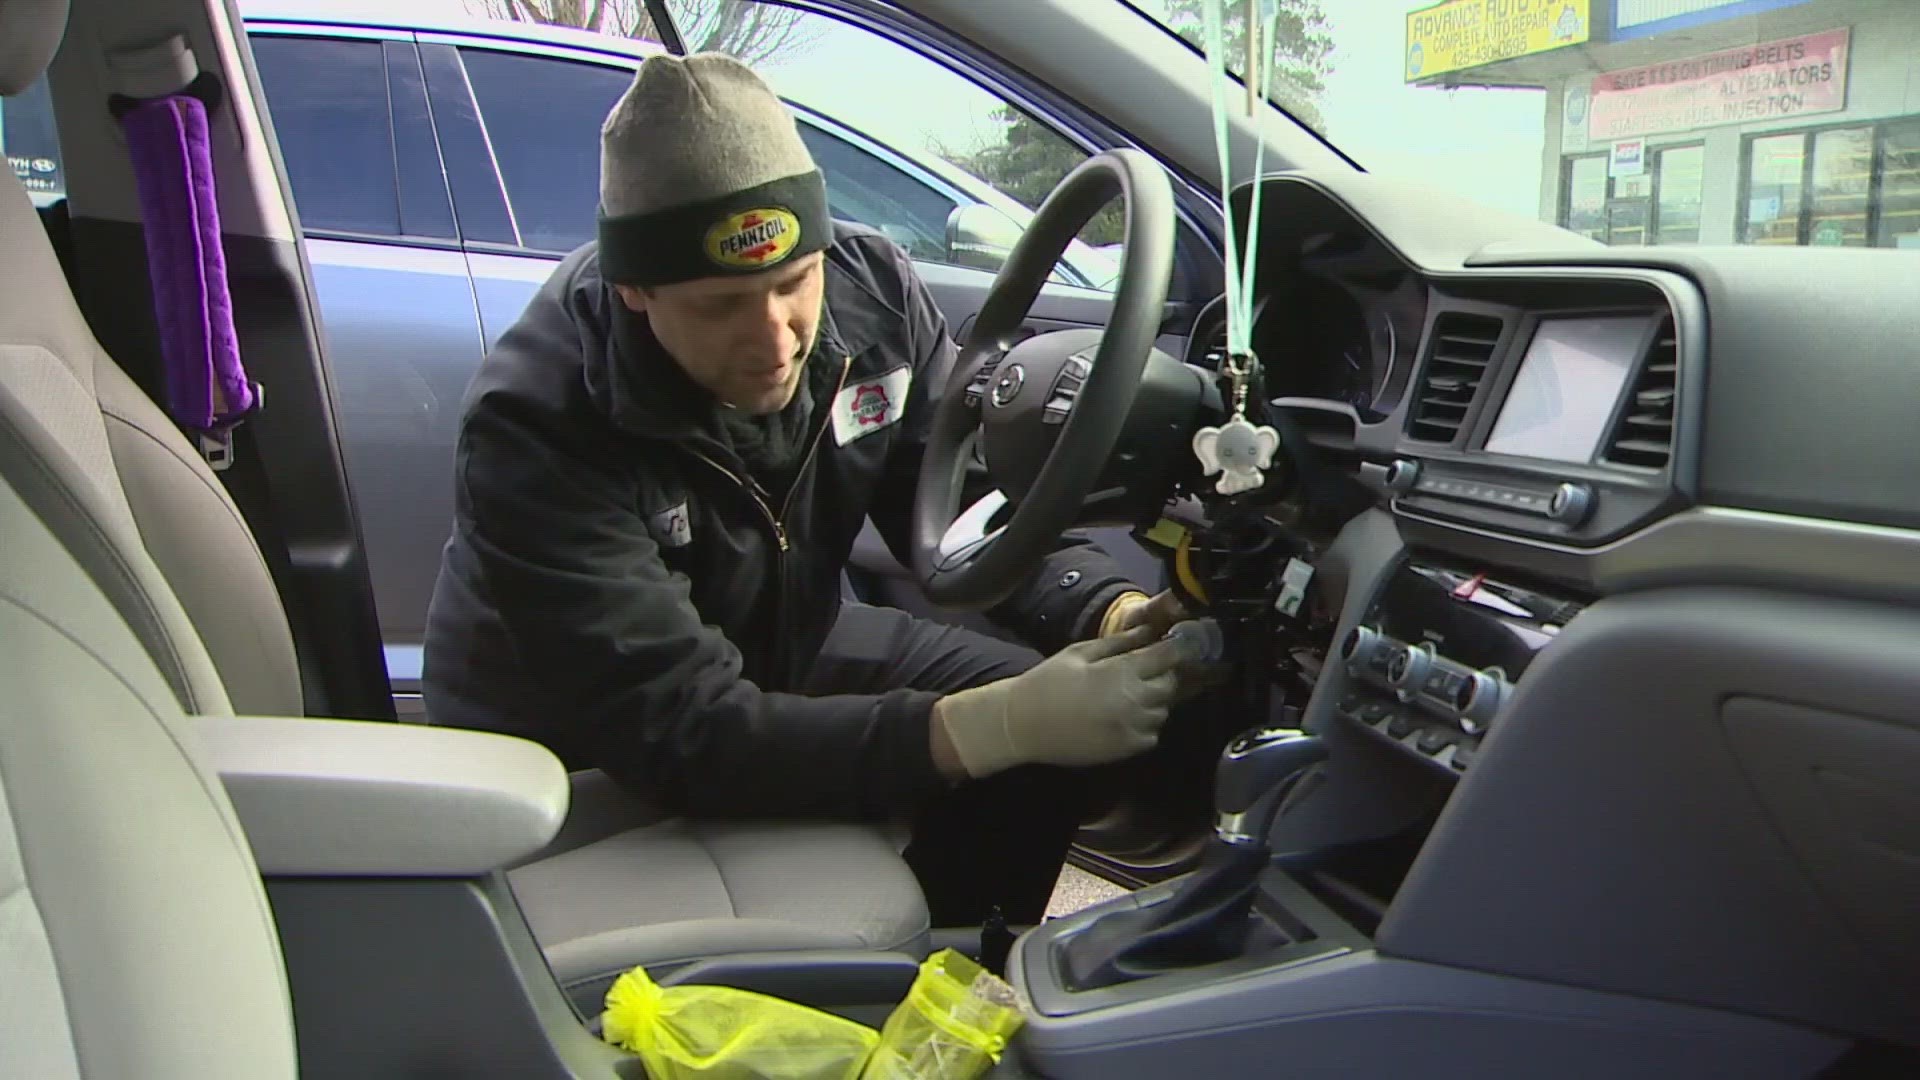 Kia and Hyundai thefts have become a troubling issue in Western Washington, and now, those cars are being used to commit serious crimes.